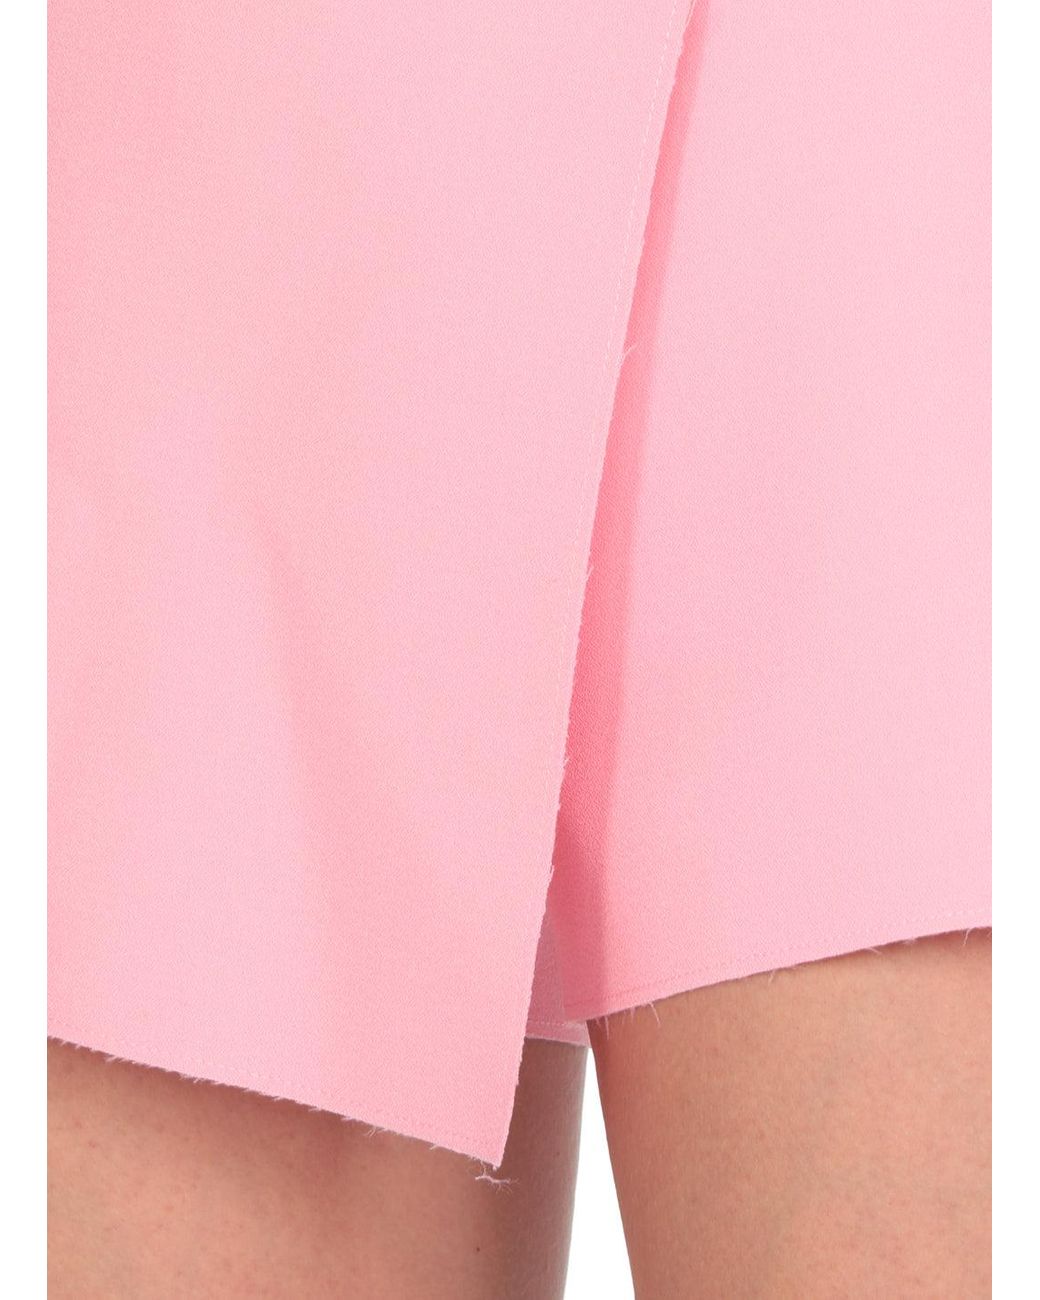 Womens Clothing Shorts Mini shorts Save 18% MSGM Synthetic Wrap Buttoned Shorts in Pink 